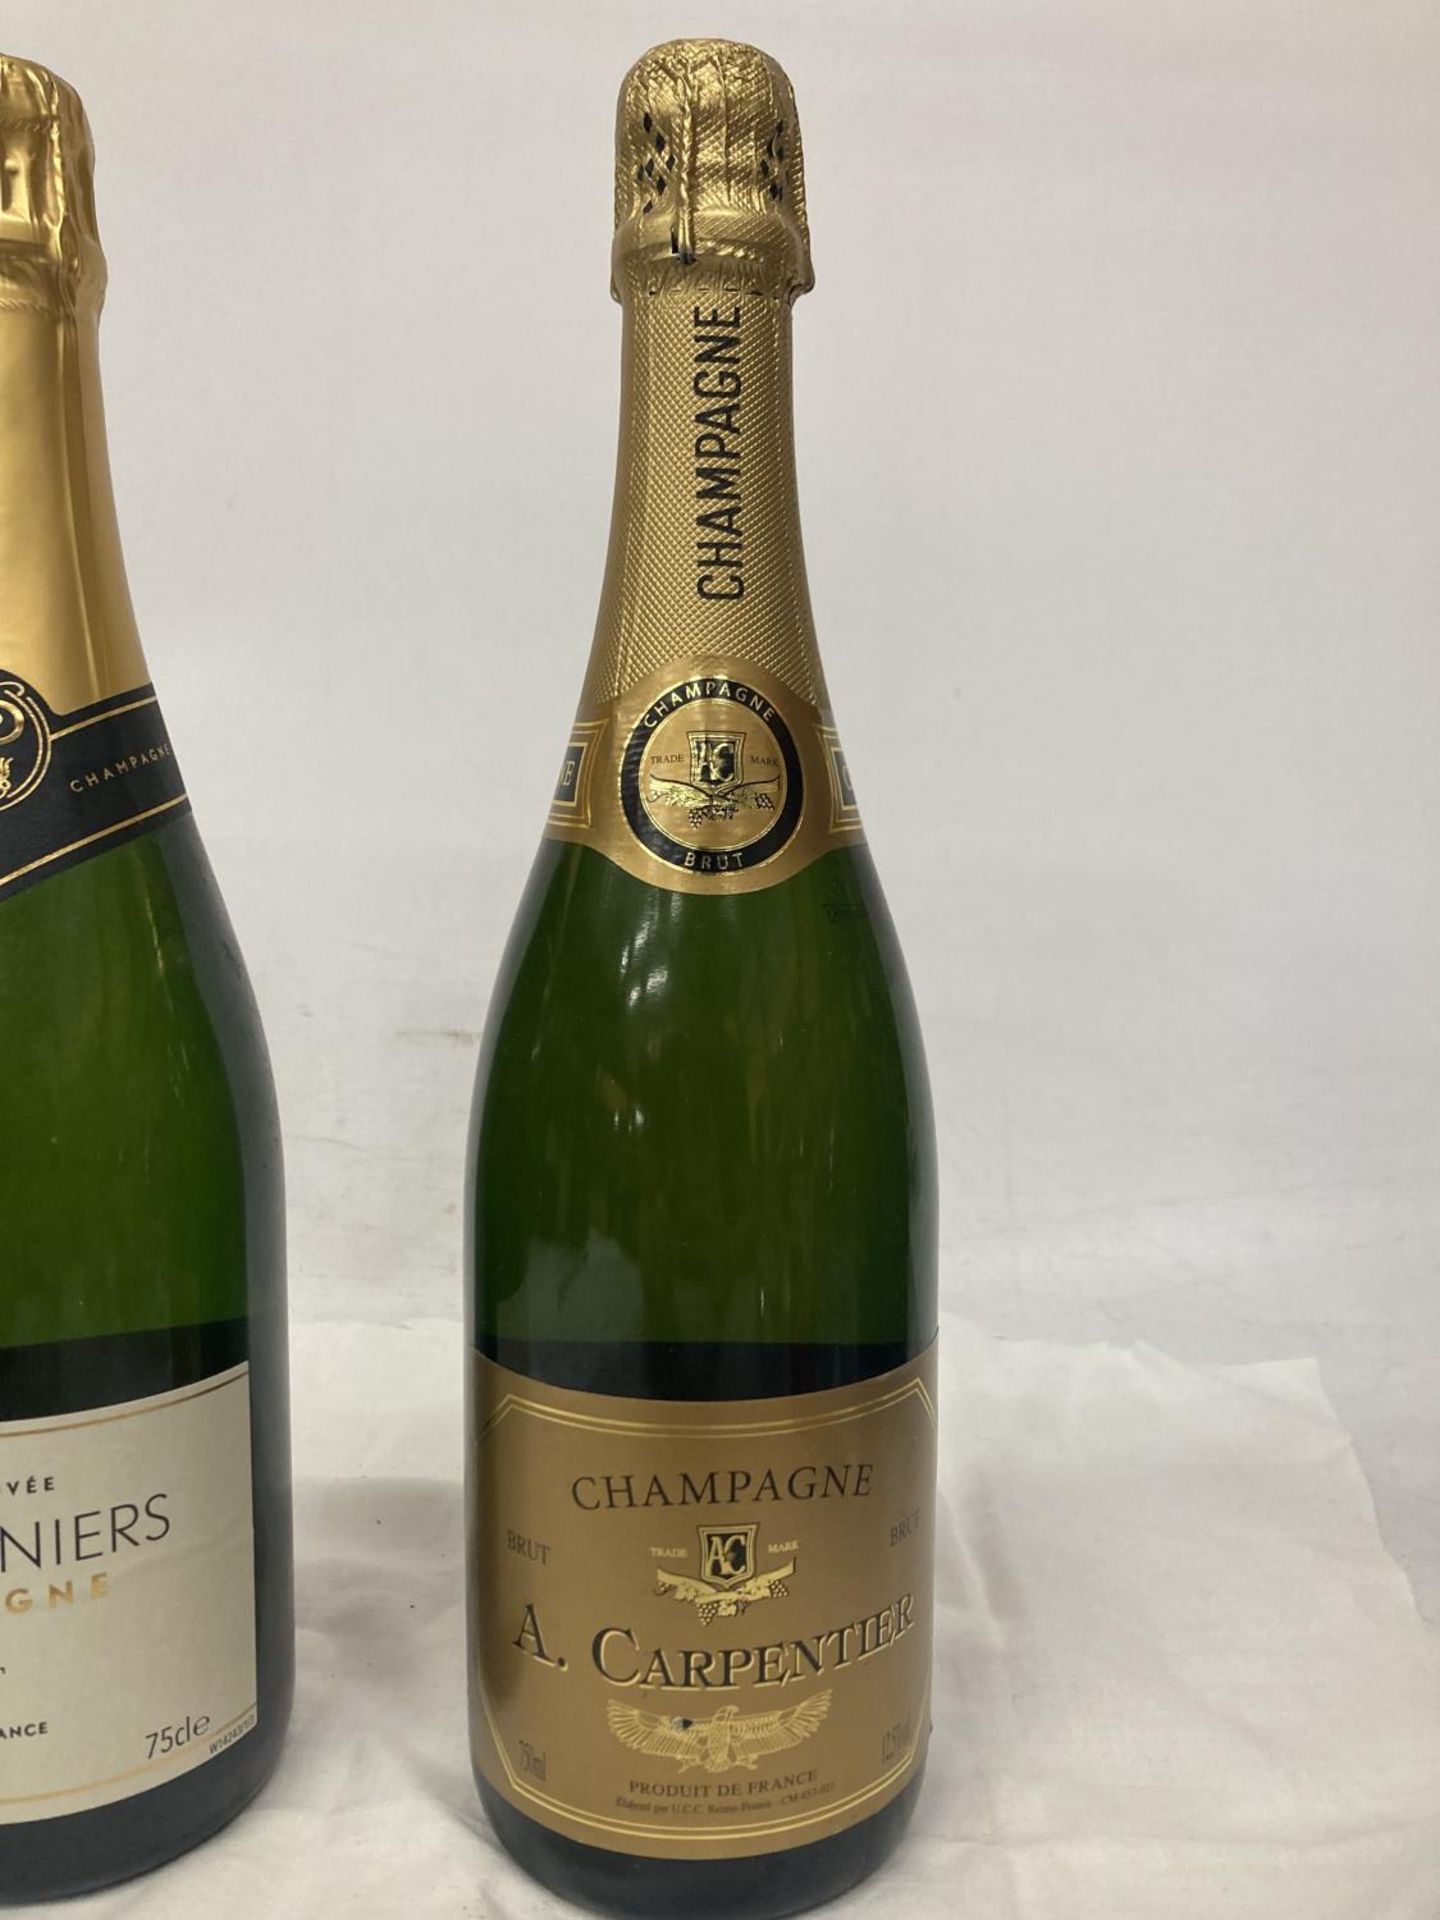 TWO 75CL BOTTLES OF CHAMPAGNE TO INCLUDE A. CARPENTIER AND LES PIONNIERS - Image 3 of 5